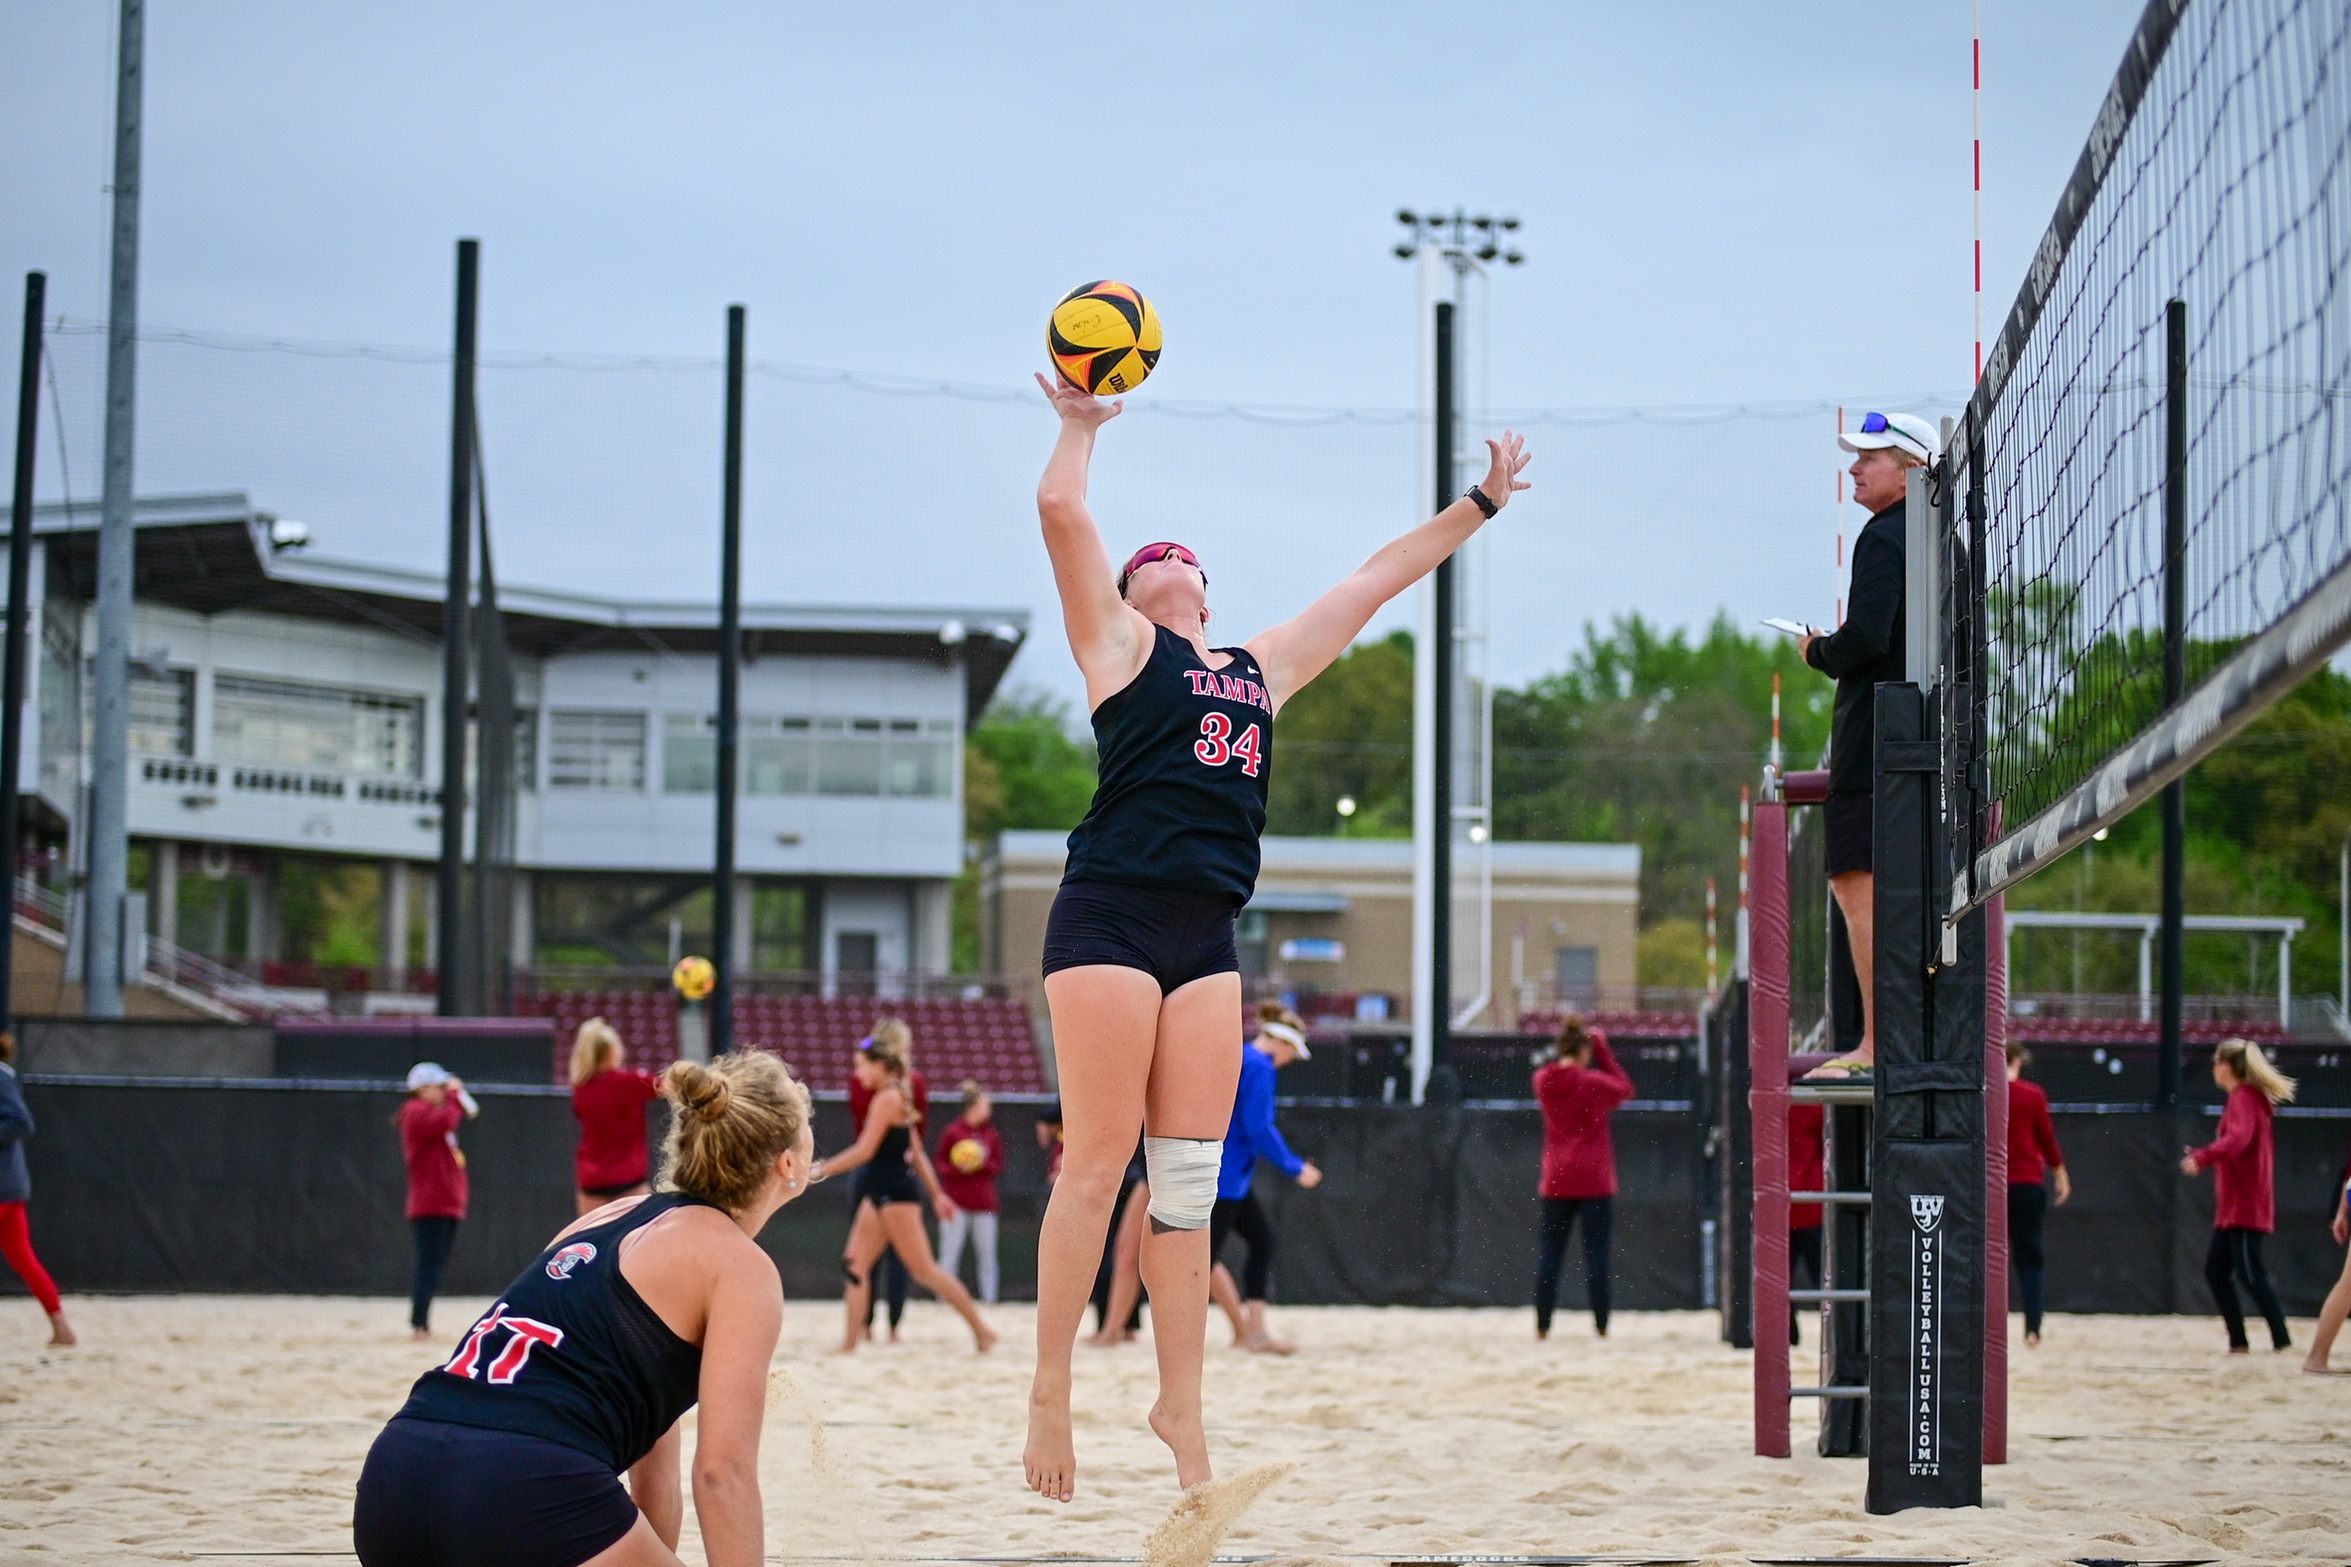 Spartans Go 3-1 in Preparation for AVCA Championships